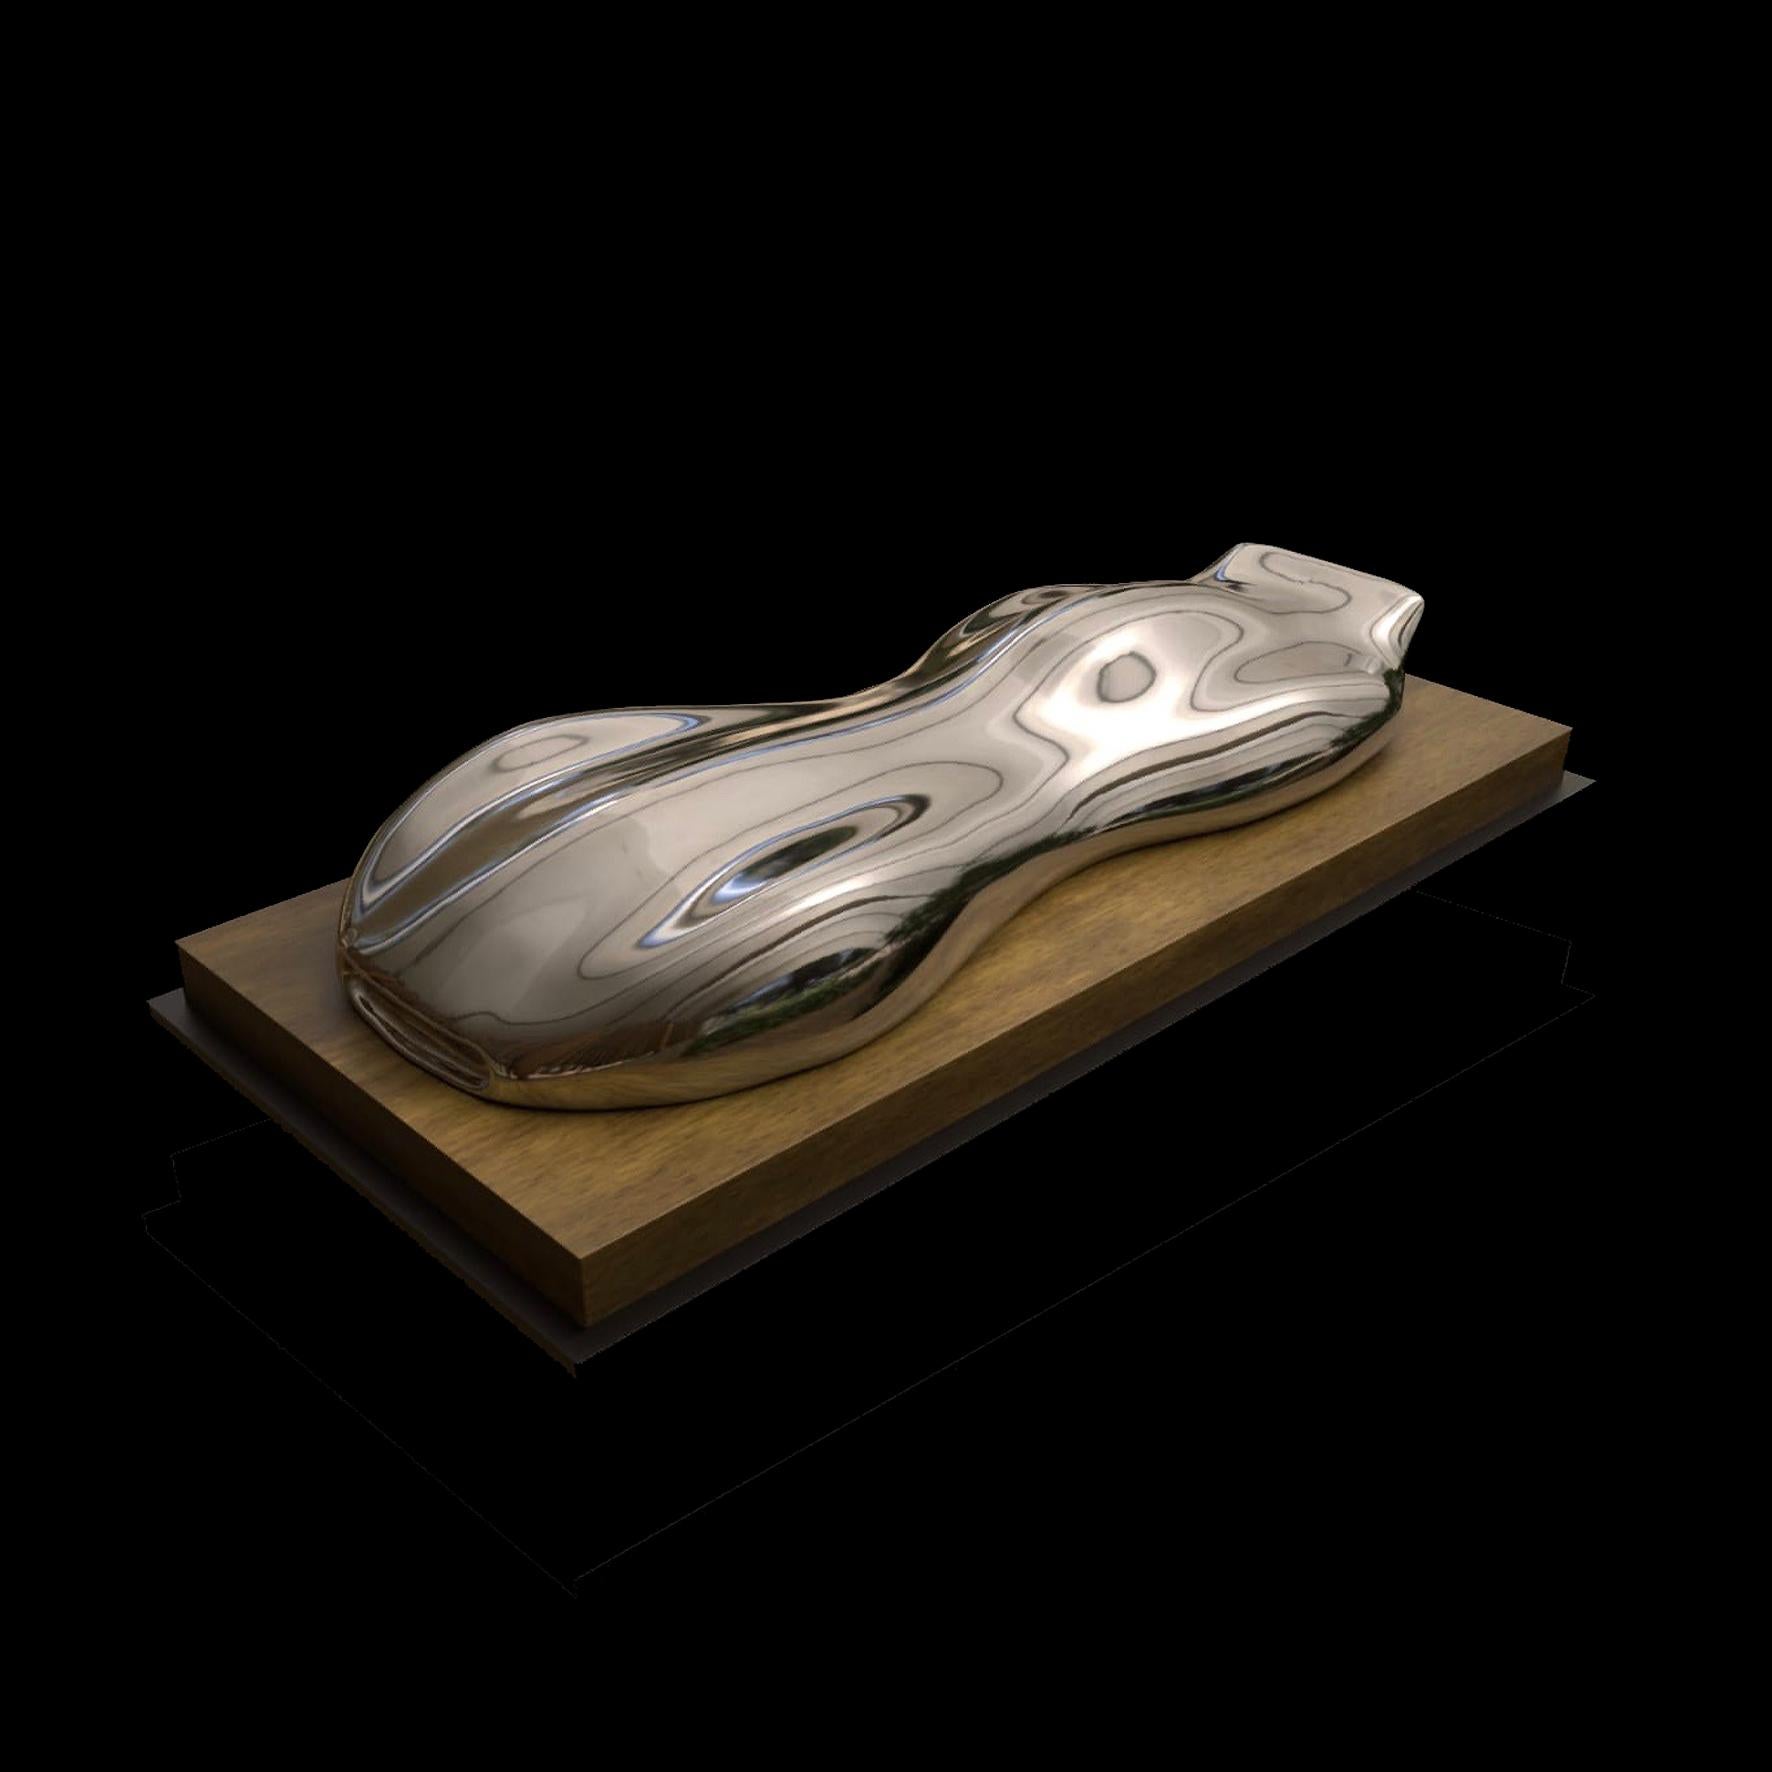 Musso

A silvered composite model of a racing car.
On a rectangular wood base.

Belzoni finds inspiration in the legendary racing cars of the 1950s and the 1960s.
His elegant sculptures epitomize the spirit of a glorious era.

